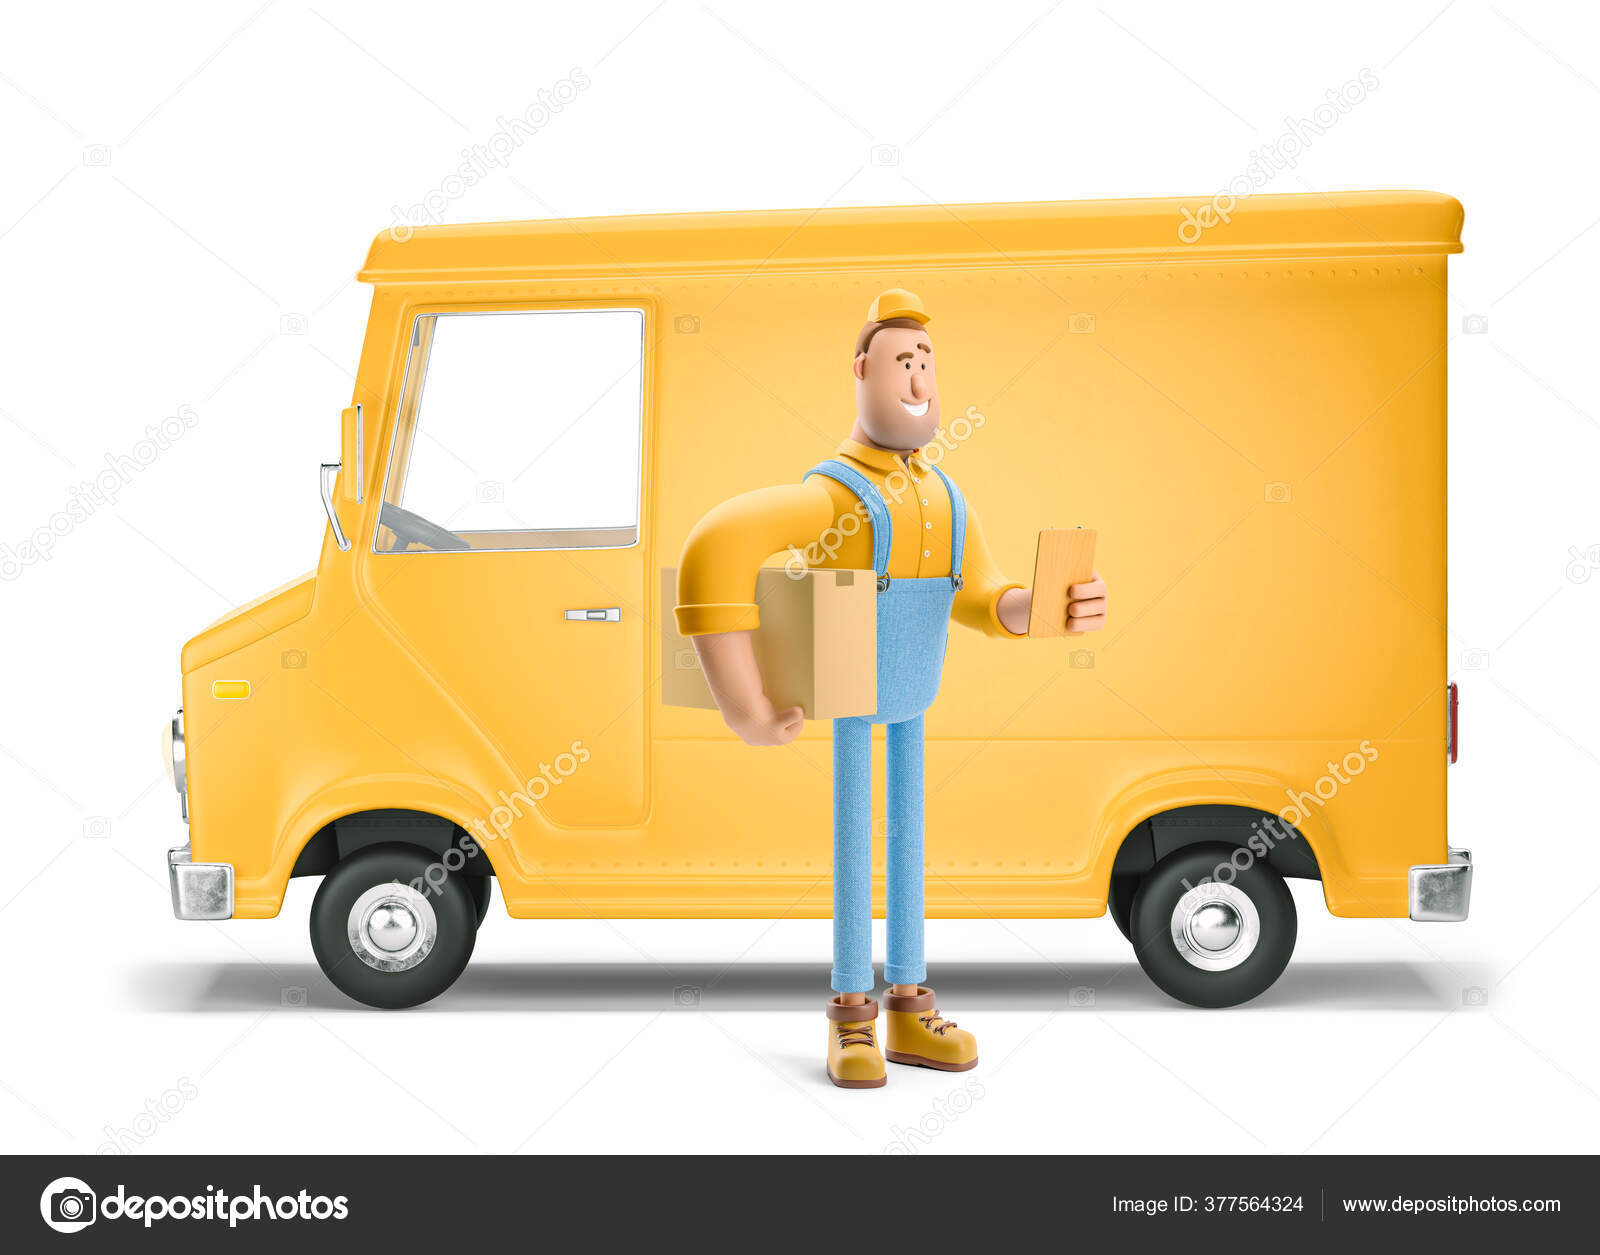 Truck delivery service and transportation. 3d illustration. Cartoon yellow  car with driver character. Stock Photo by ©bestpixels 377564324